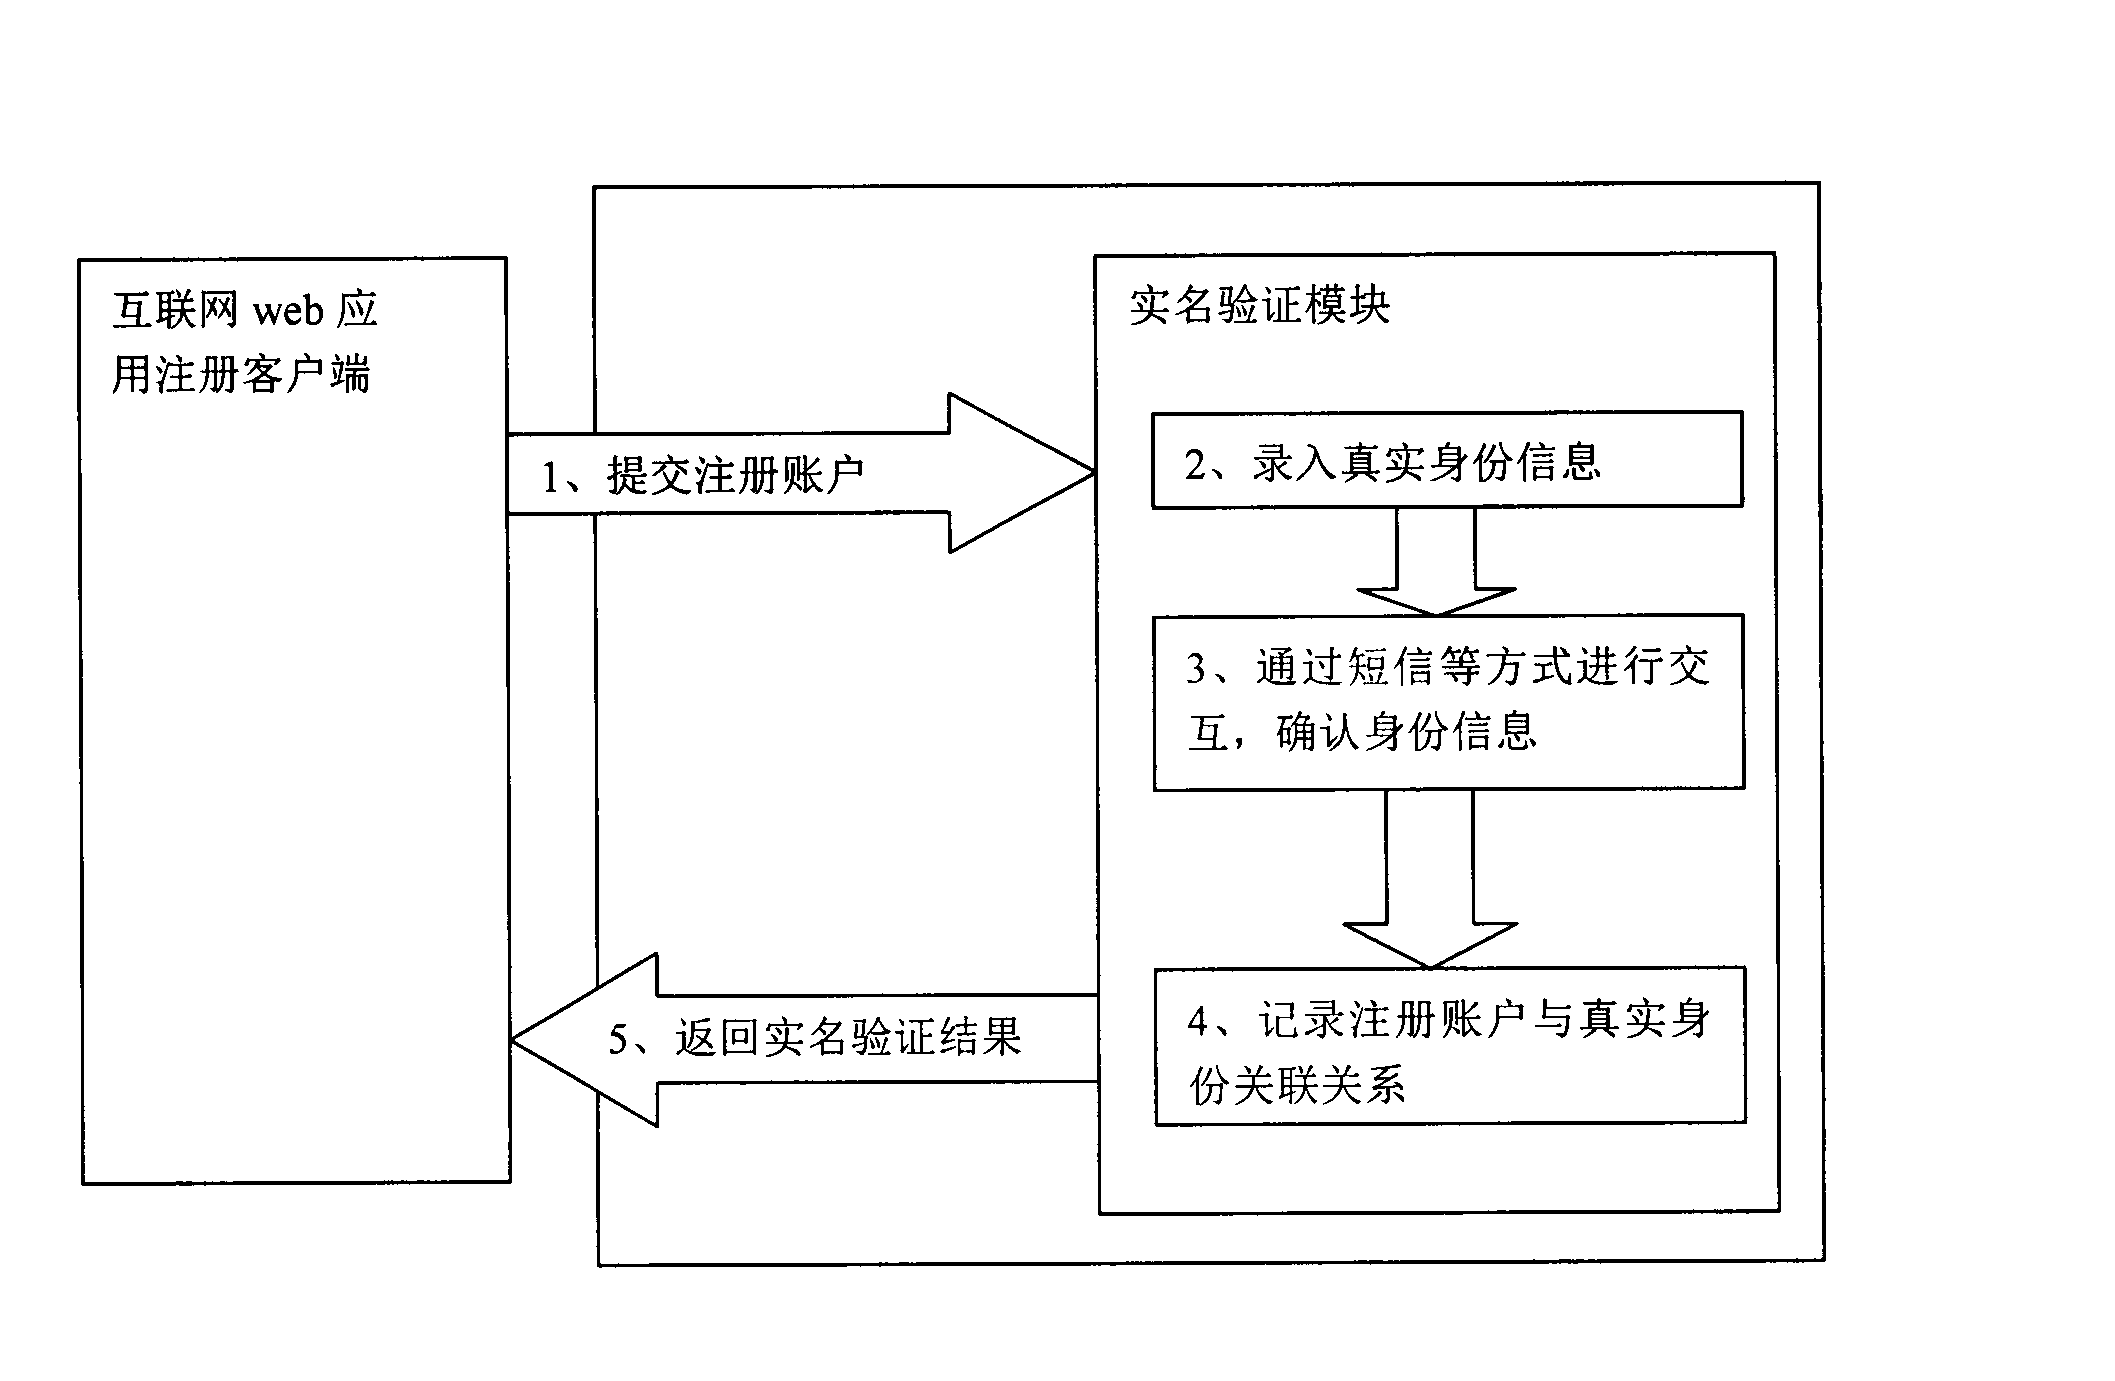 Real-name certification system and method capable of hiding identity information